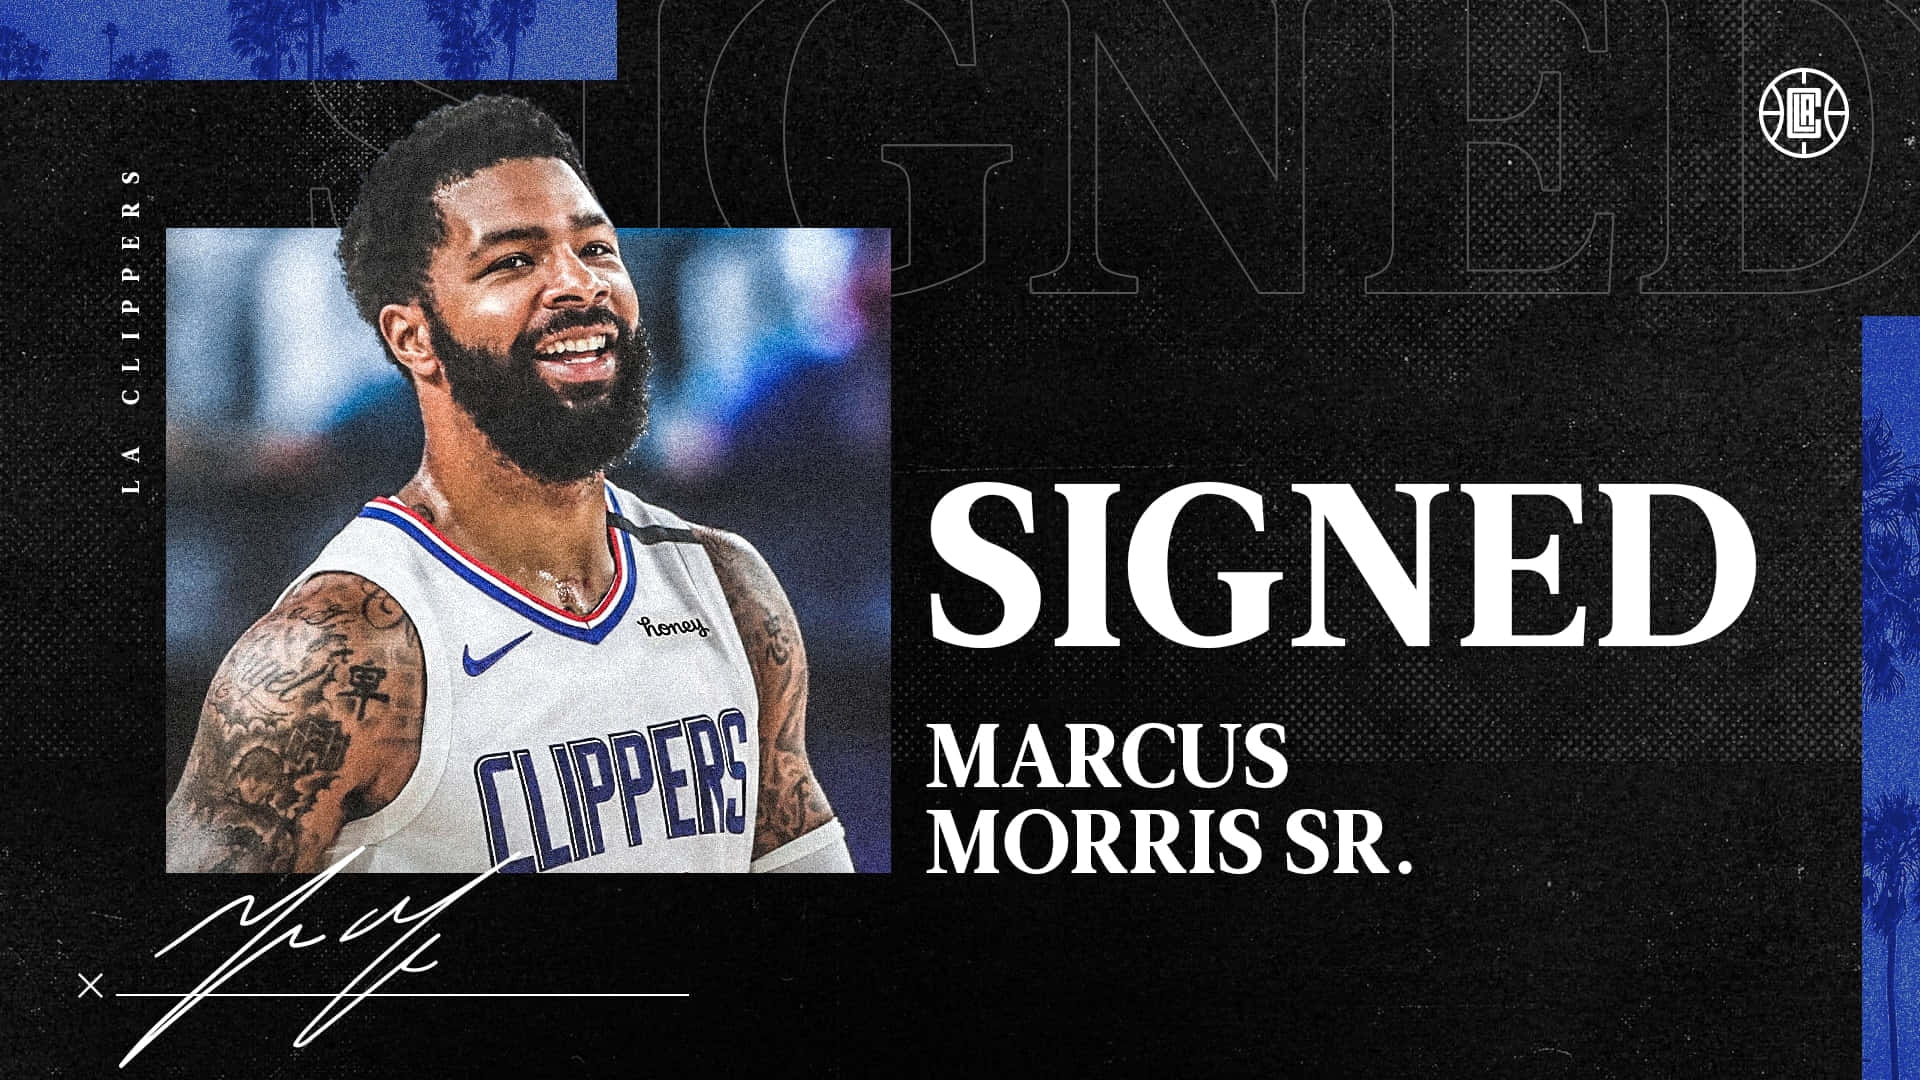 Los Angeles Clippers Signed Marcus Morris Sr. Wallpaper